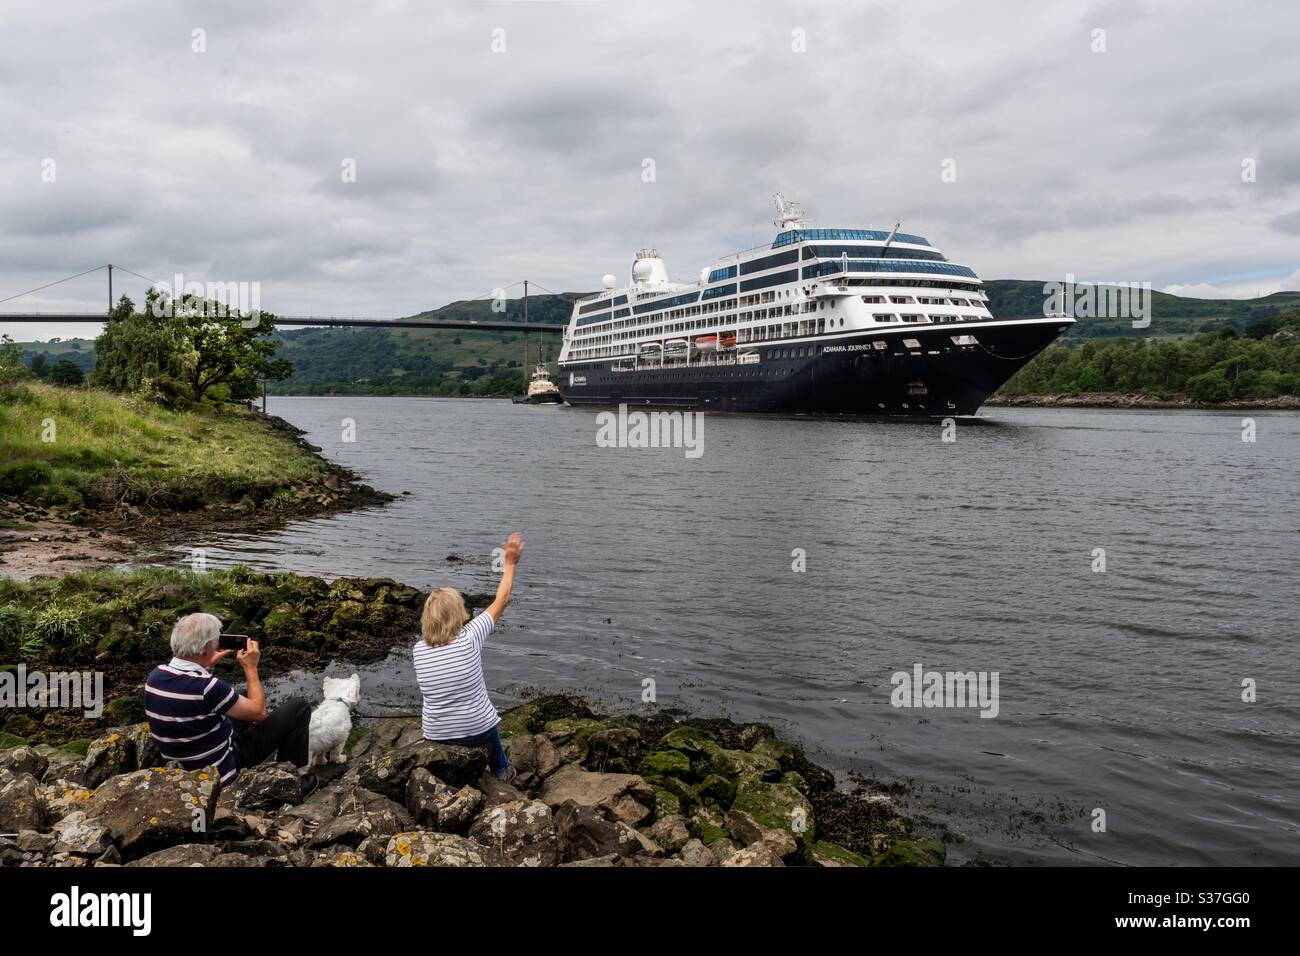 Azamara Journey passing through Erskine 25/06/20 to lay up at King George V Dock in Glasgow. Stock Photo